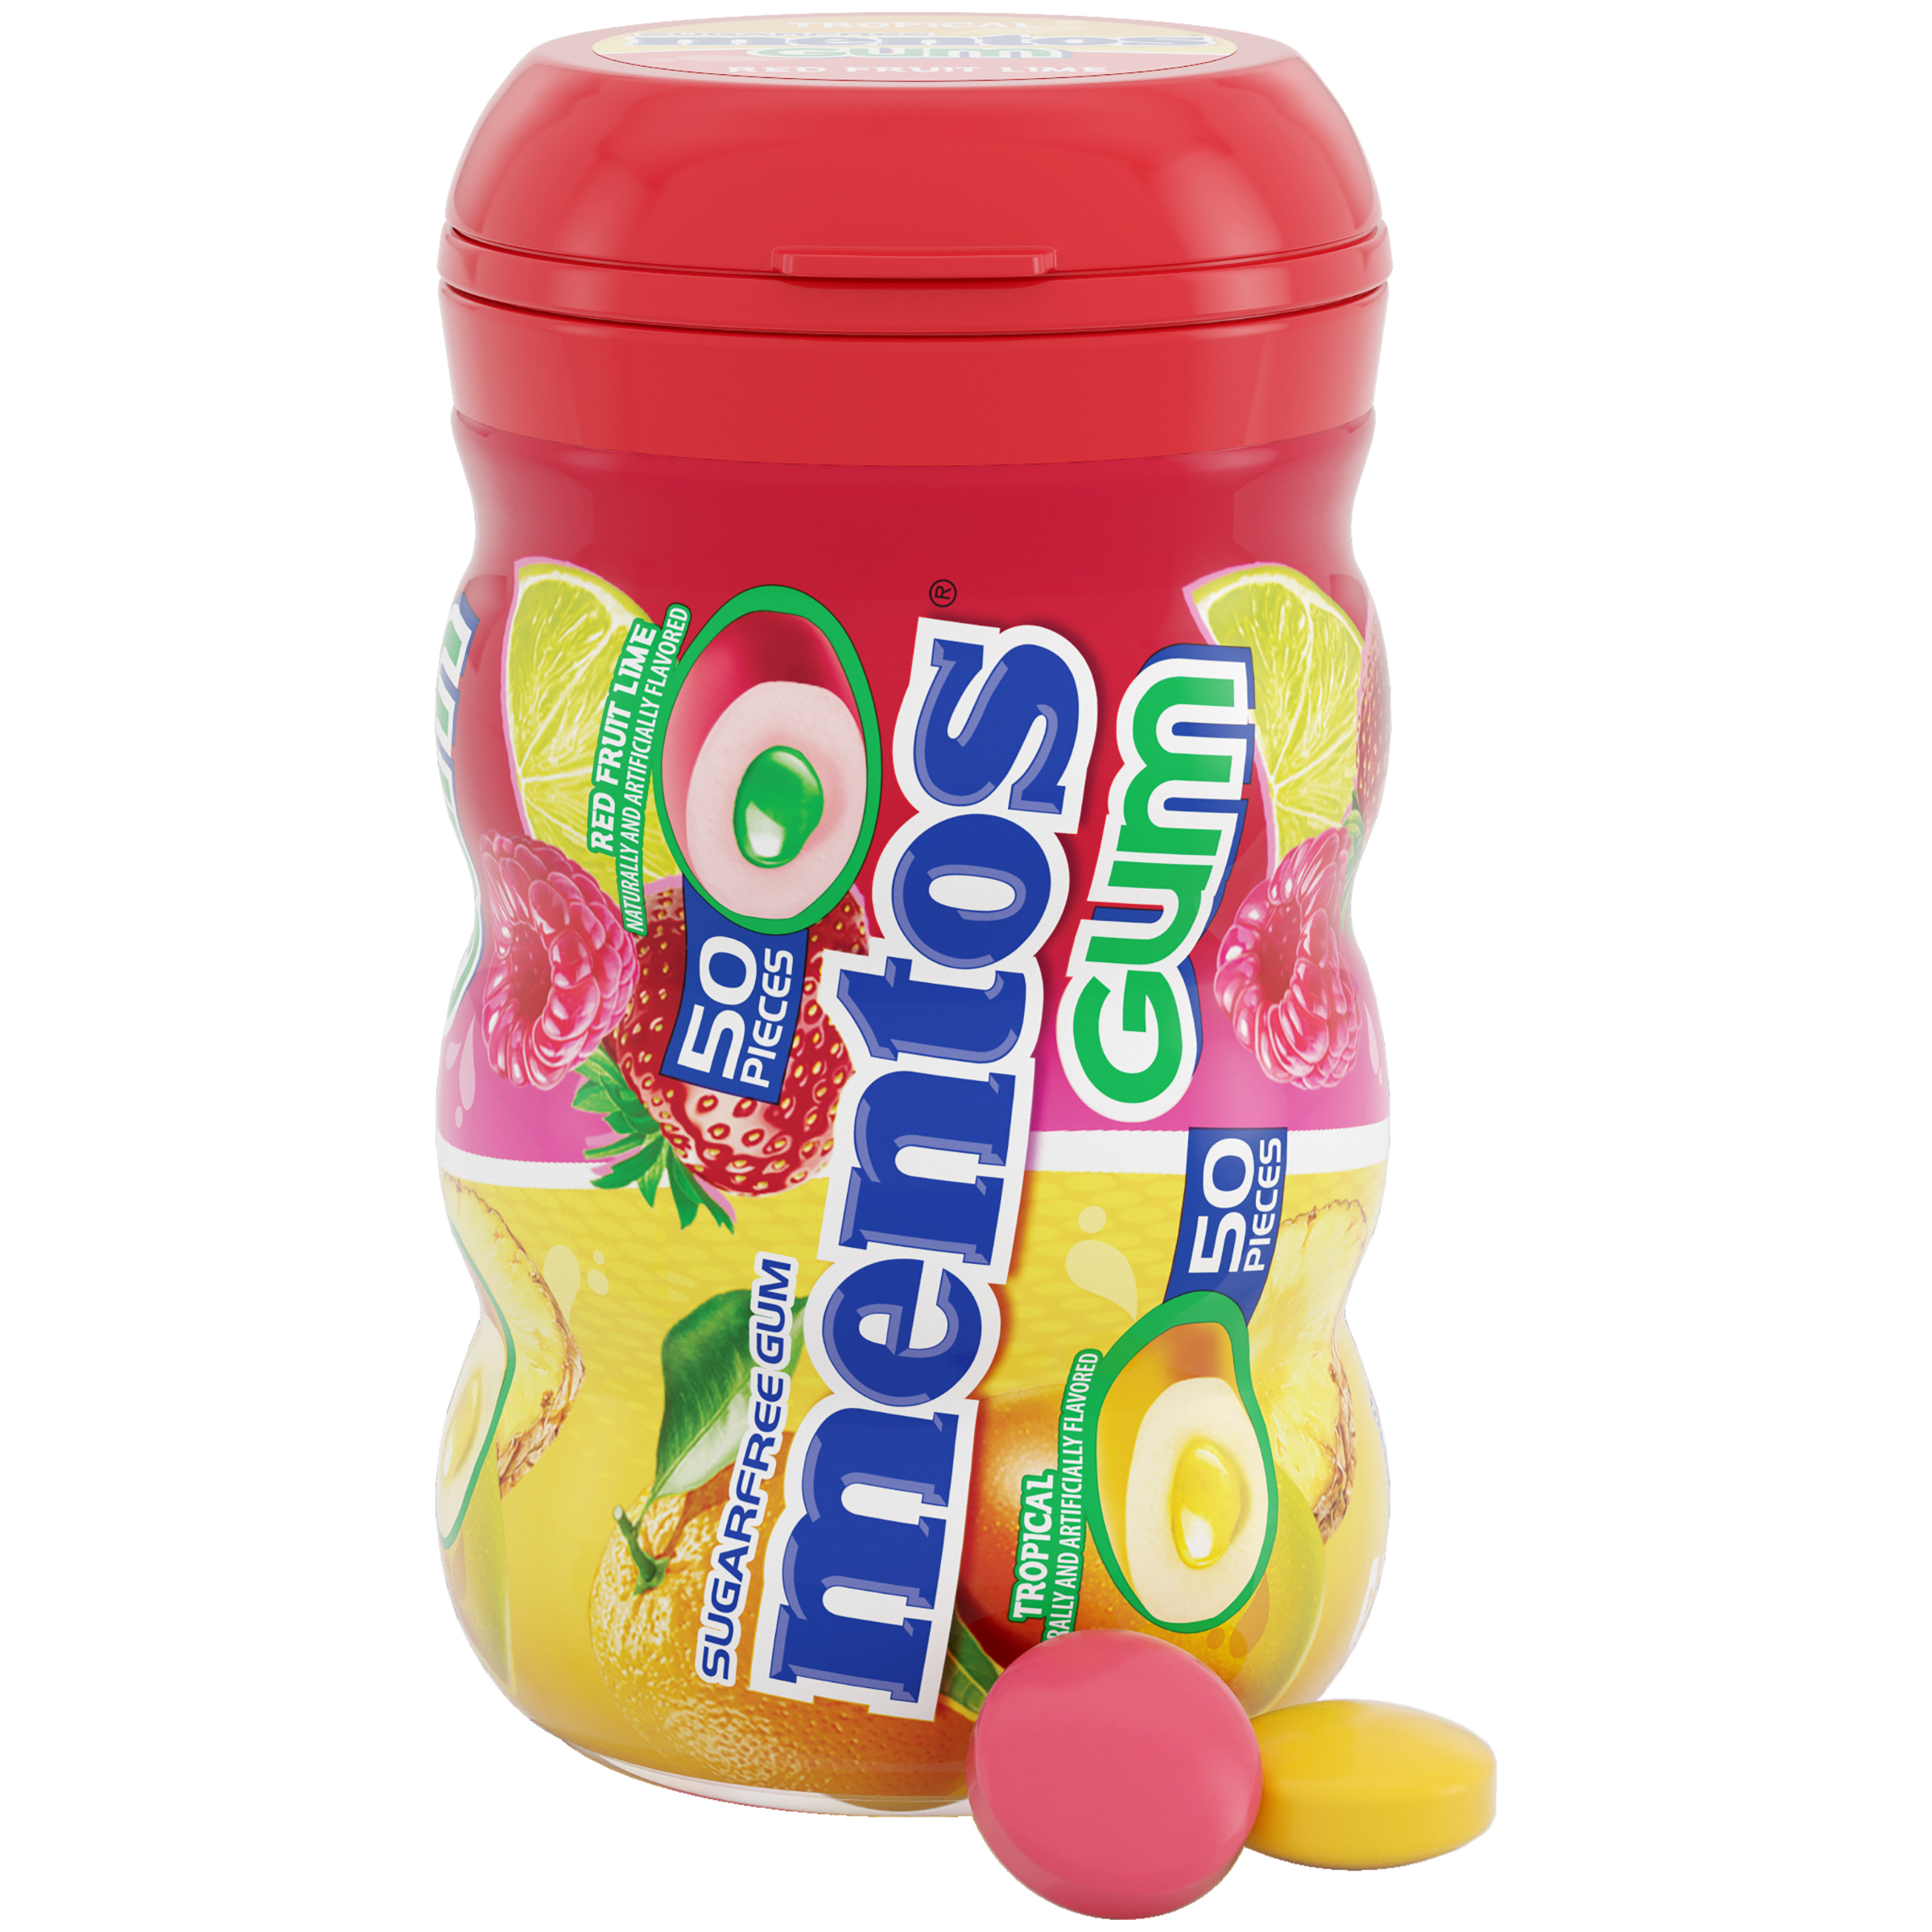 Mentos Gum Sugar-Free Tropical Red Fruit Lime Chewing Gum, 50 Regular Size Pieces, Bottle - image 9 of 9